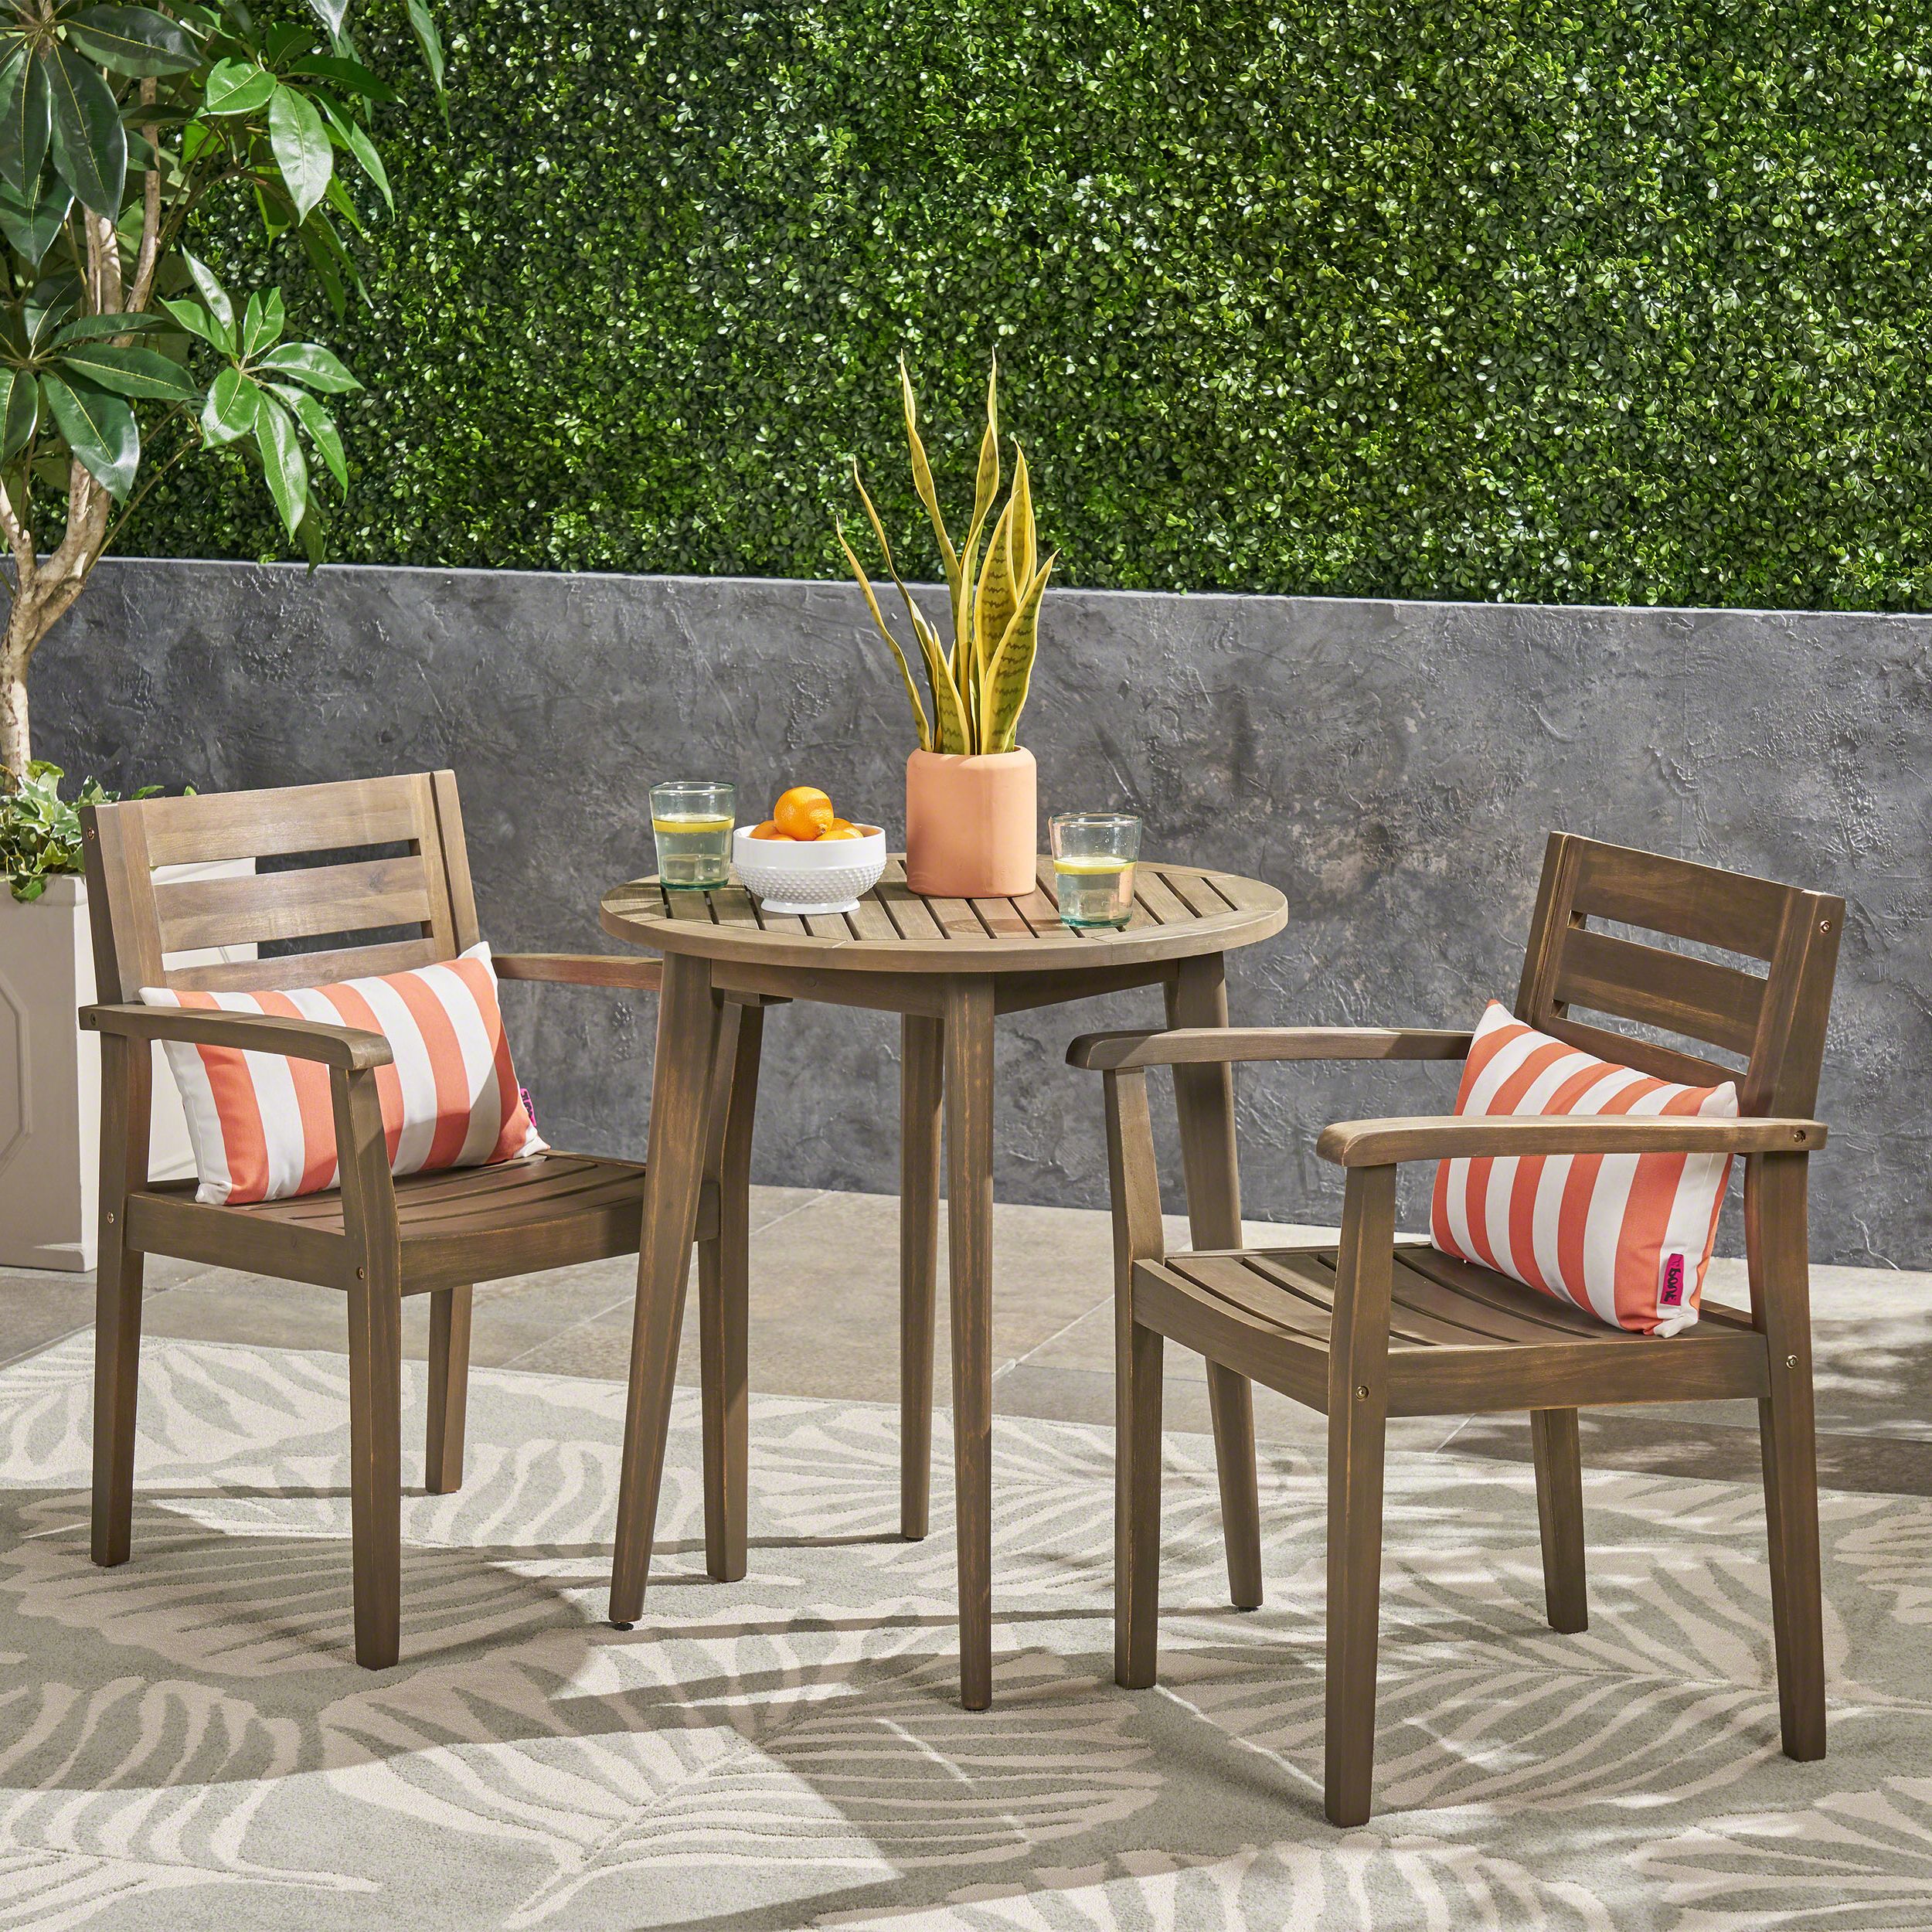 Zack Outdoor 3 Piece Acacia Wood Bistro Set With Straight Legged Table Pertaining To Most Recent 3 Piece Outdoor Table And Chair Sets (View 1 of 15)